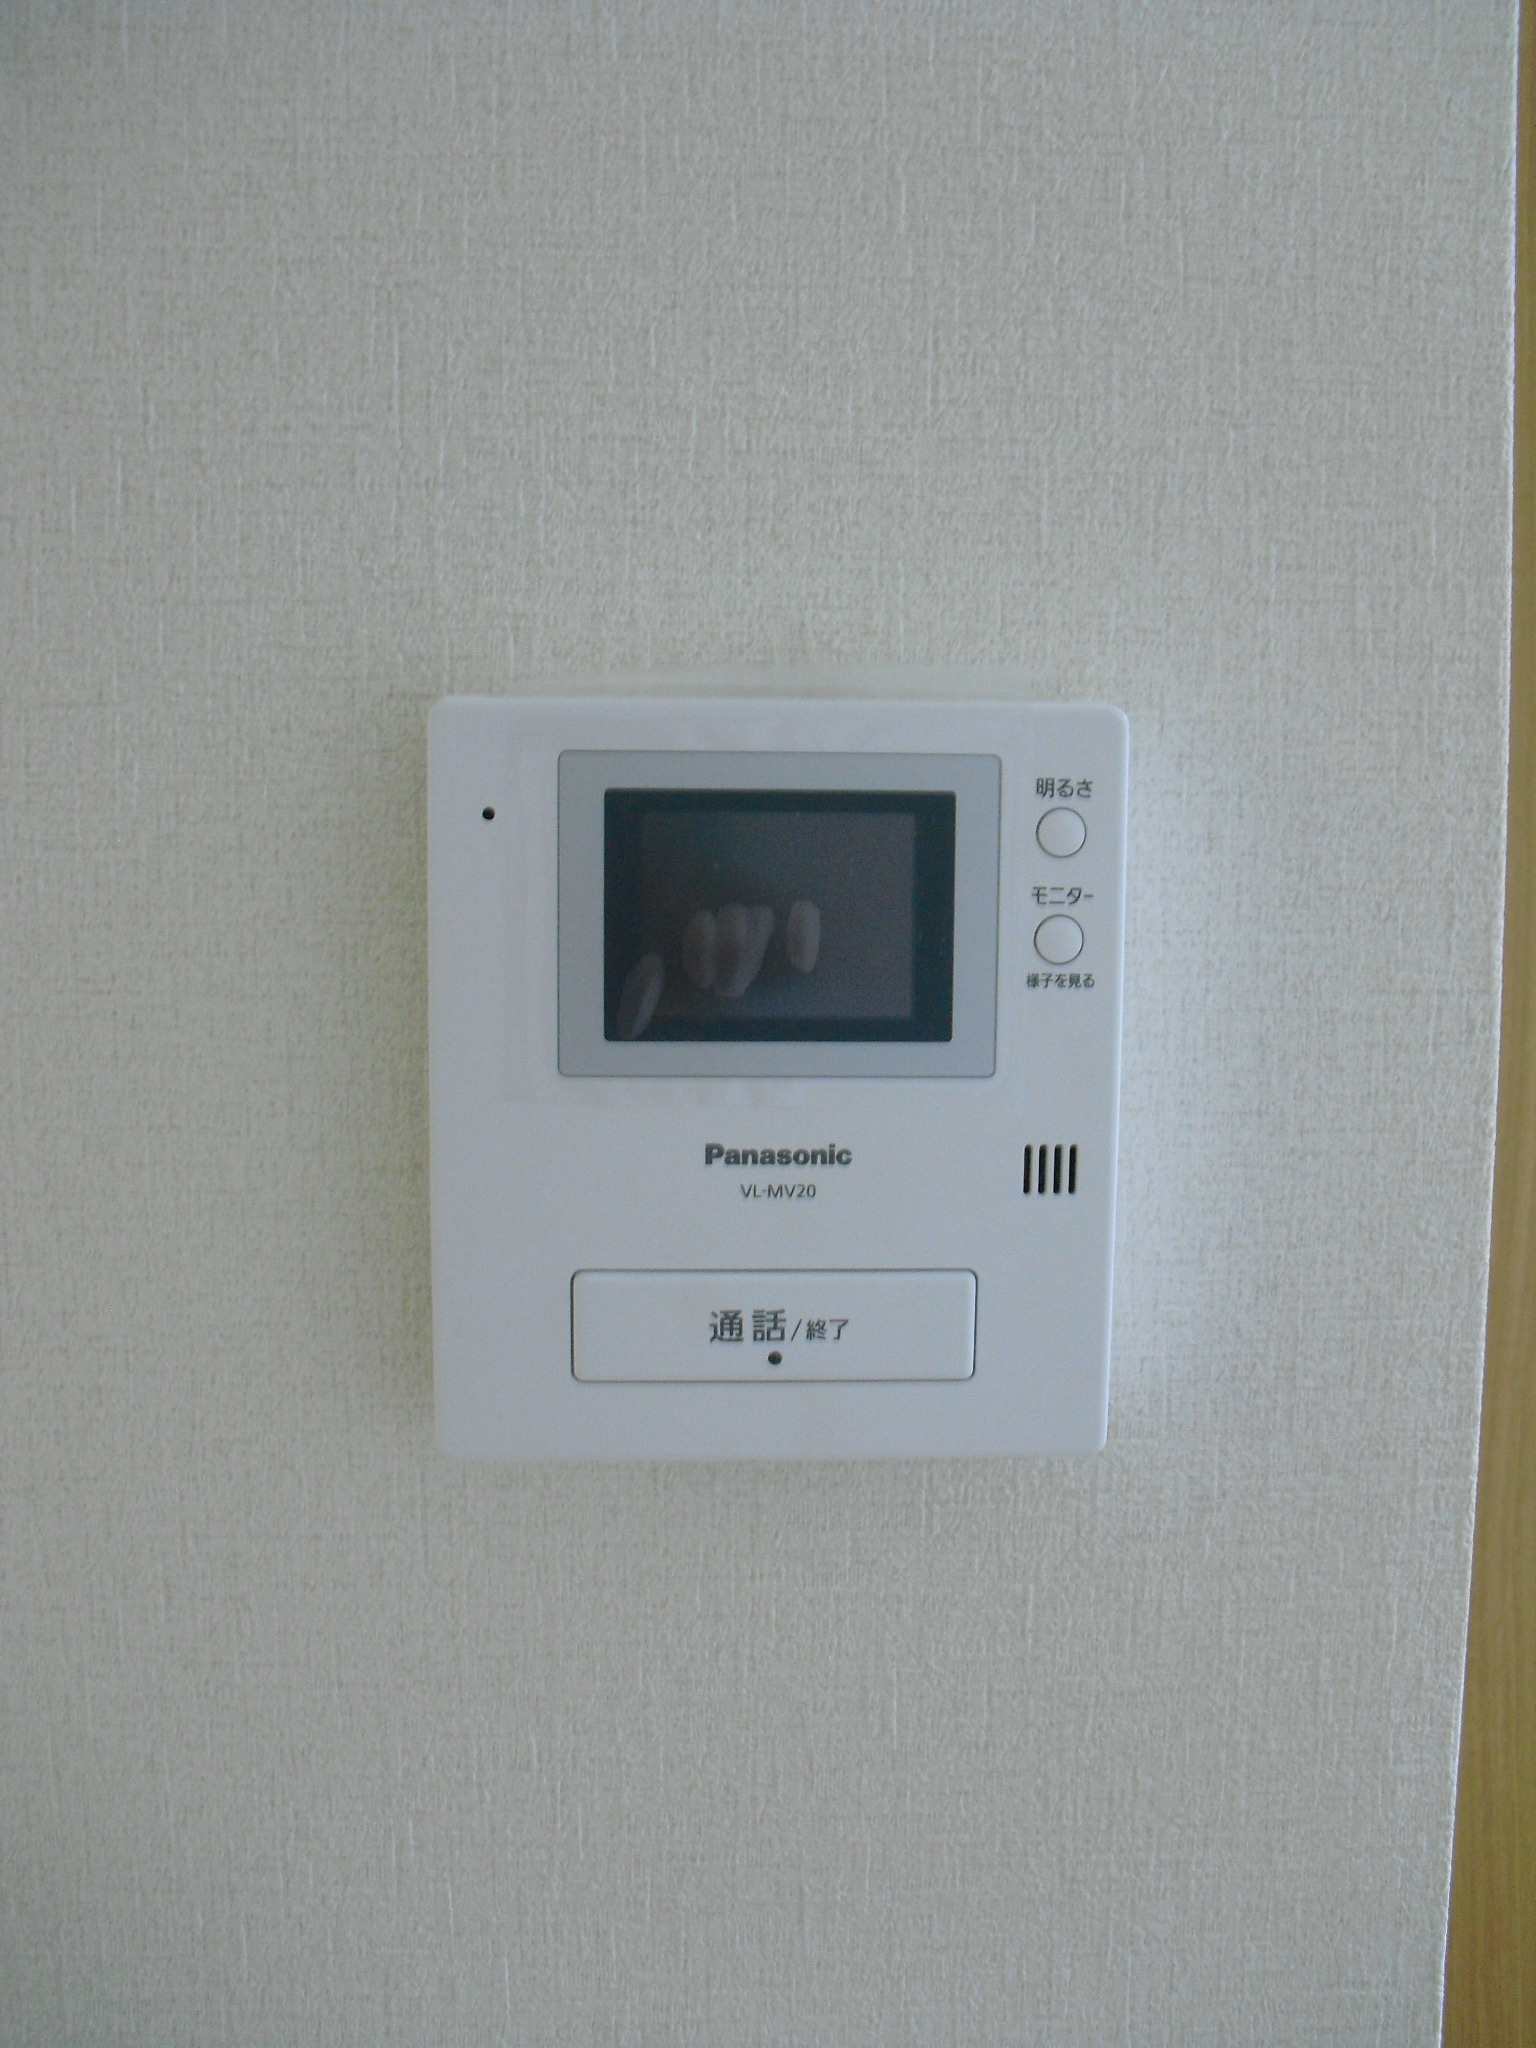 Security. It comes with a course intercom with monitor. 